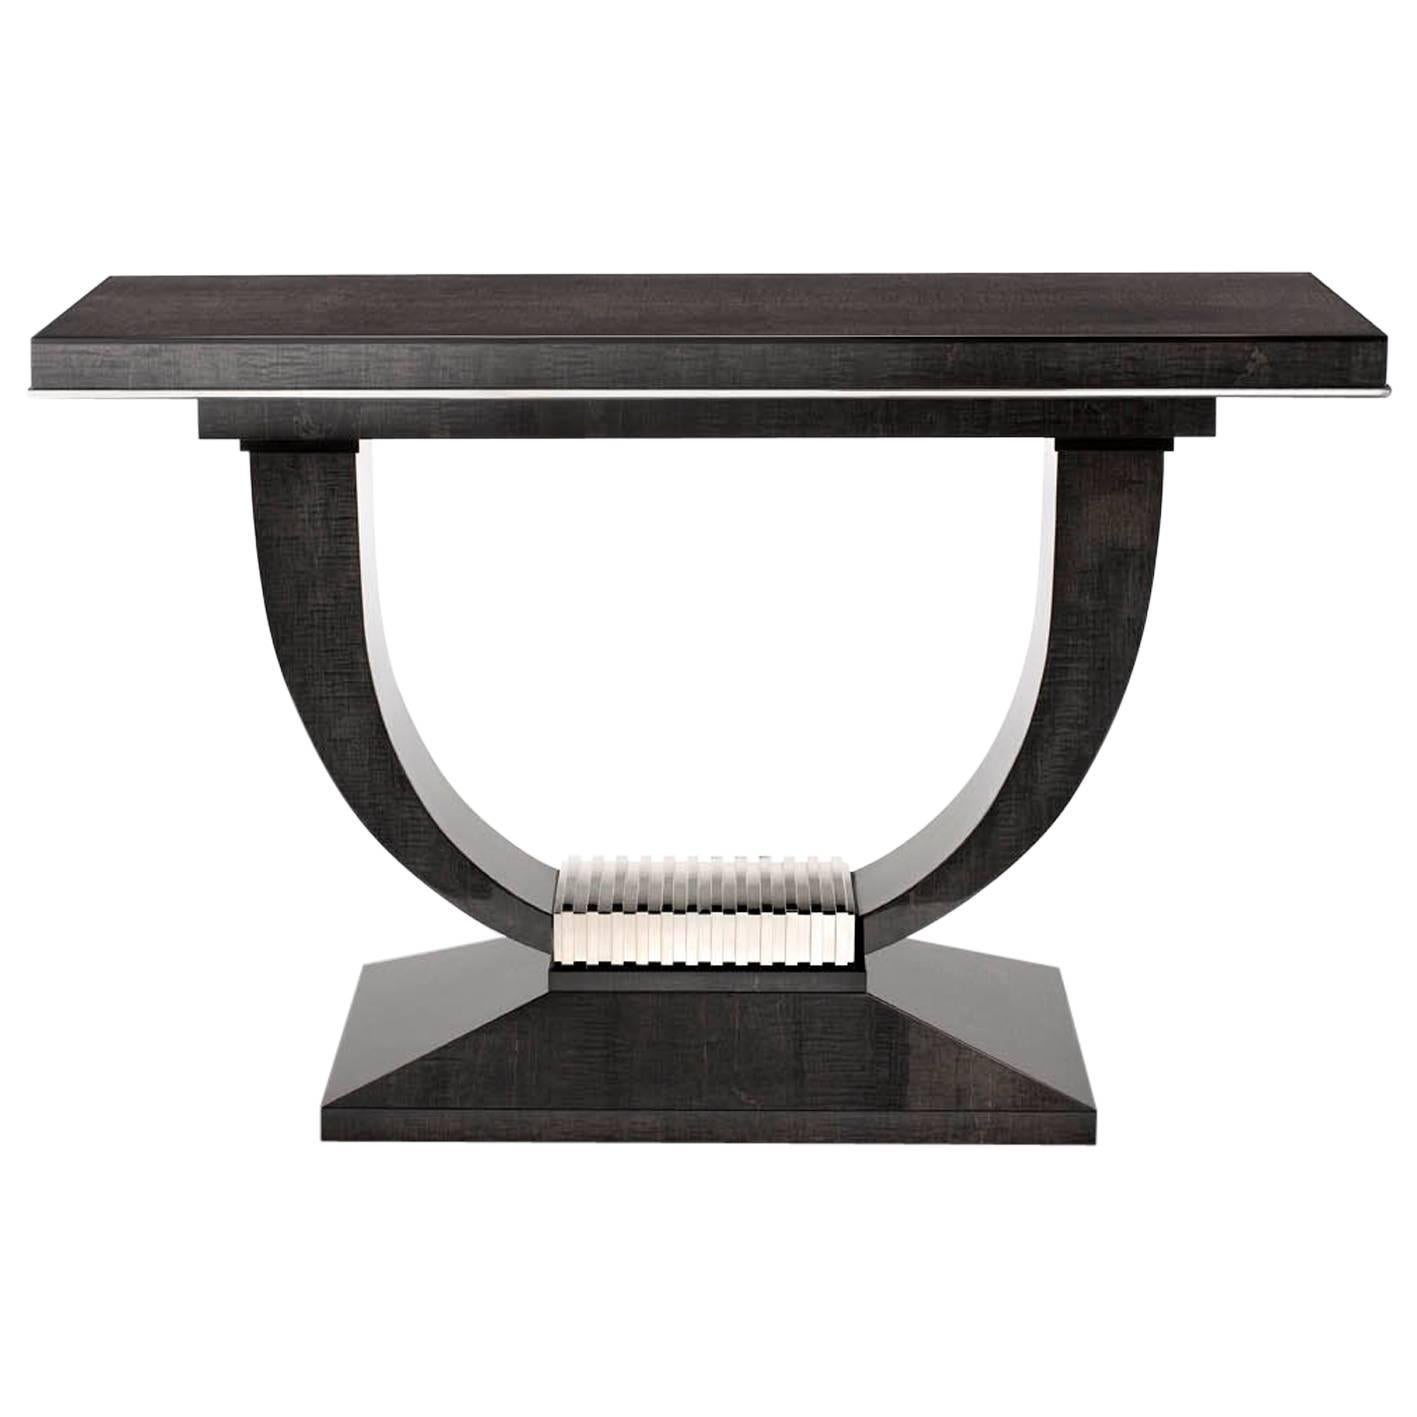 Davidson's Albany Console Table, Sycamore Black Wood & Polished Nickel